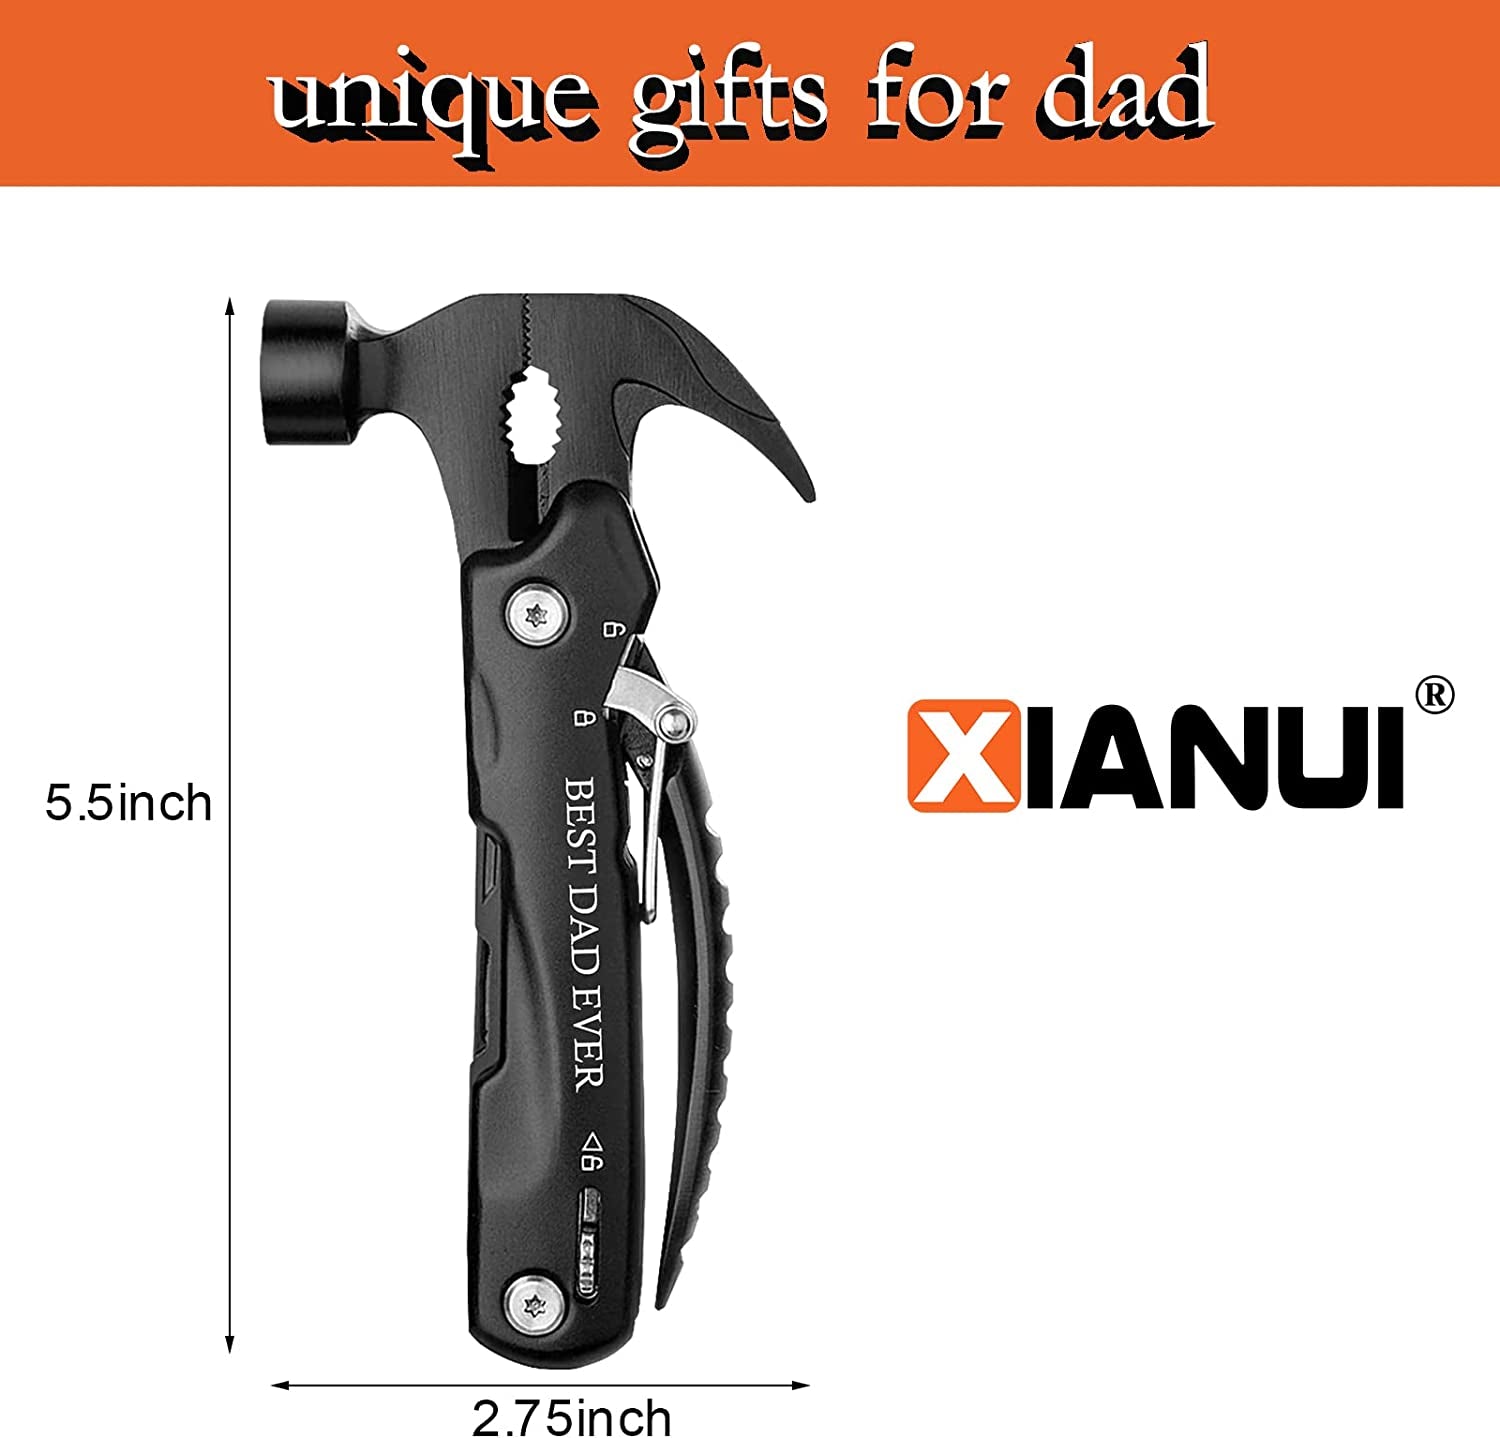 "Father's Day Multitool Hammer - The Ultimate Gift for the World's Greatest Dad! Surprise Him with a One-of-a-Kind Present and Unforgettable Christmas Gifts from Loved Ones - Perfect Stocking Stuffers for the Dad Who Deserves Everything!"